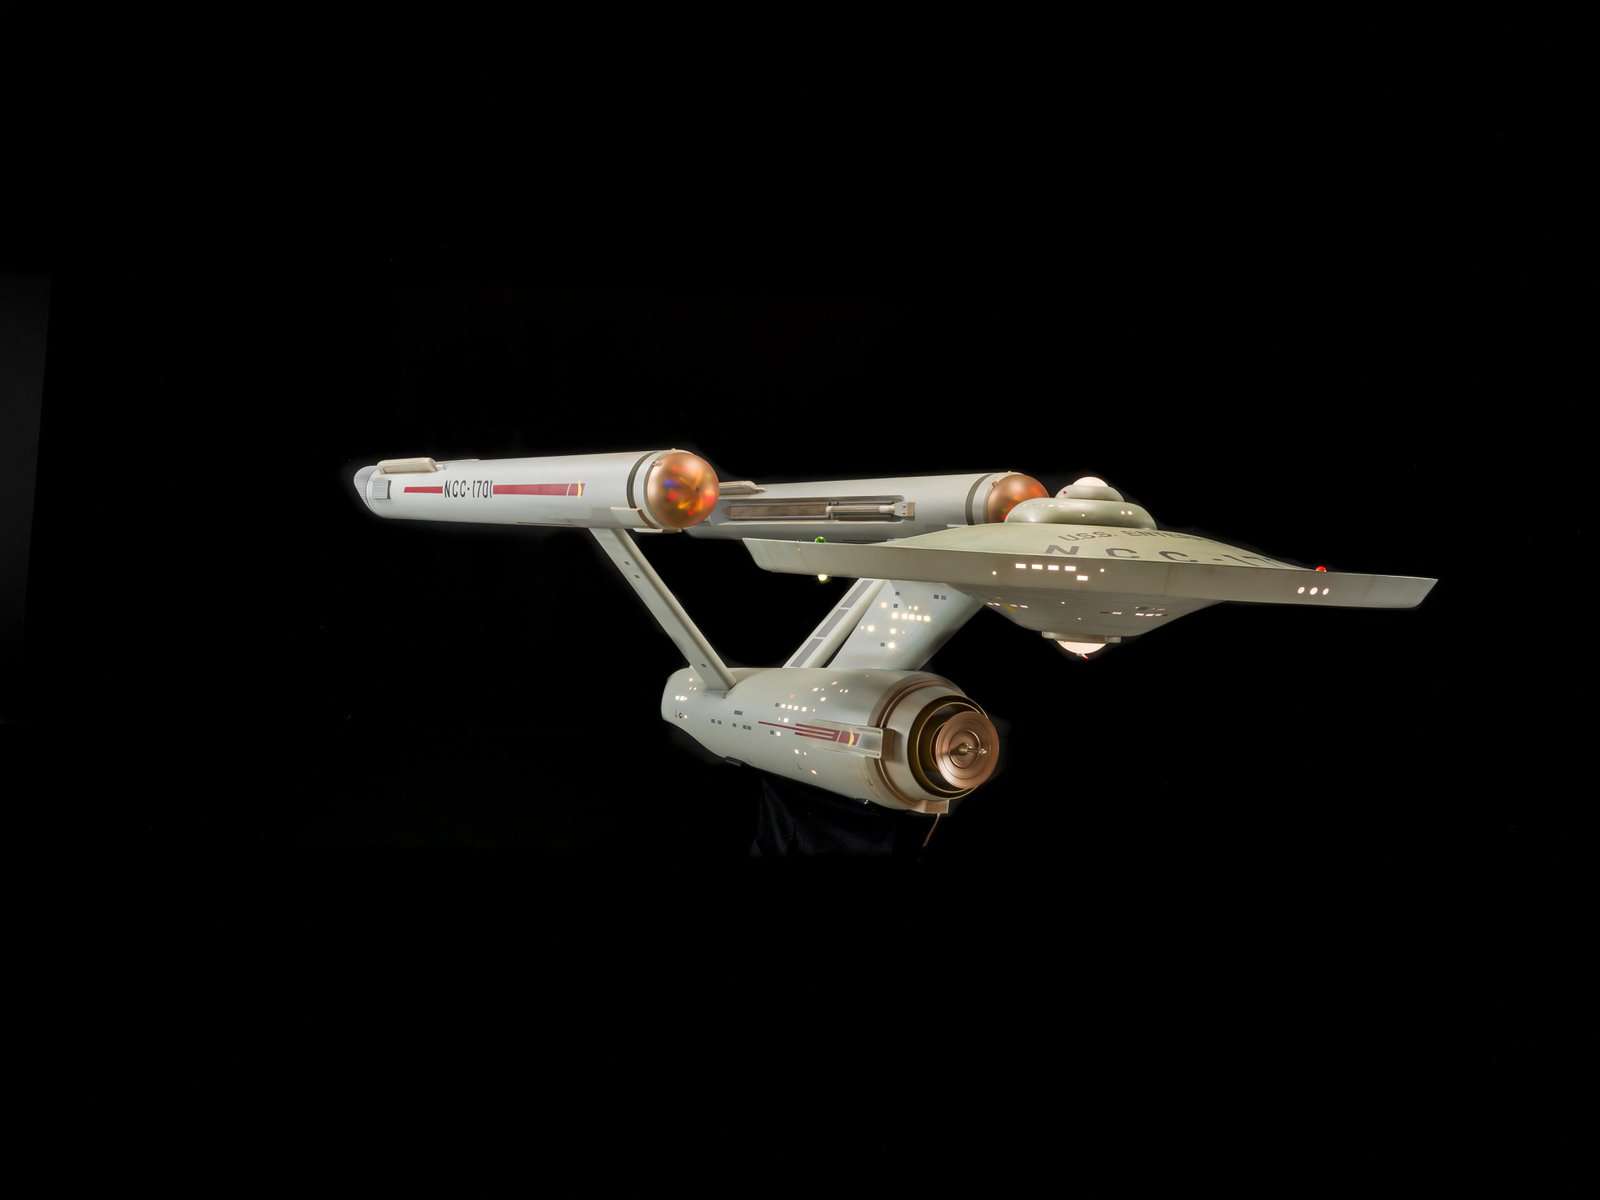 Starship Enterprise model (A19740668000) from the television series "Star Trek", photographed post conservation at the National Air and Space Museum's Steven F. Udvar-Hazy Center by Dane A. Penland, May 31, 2016.